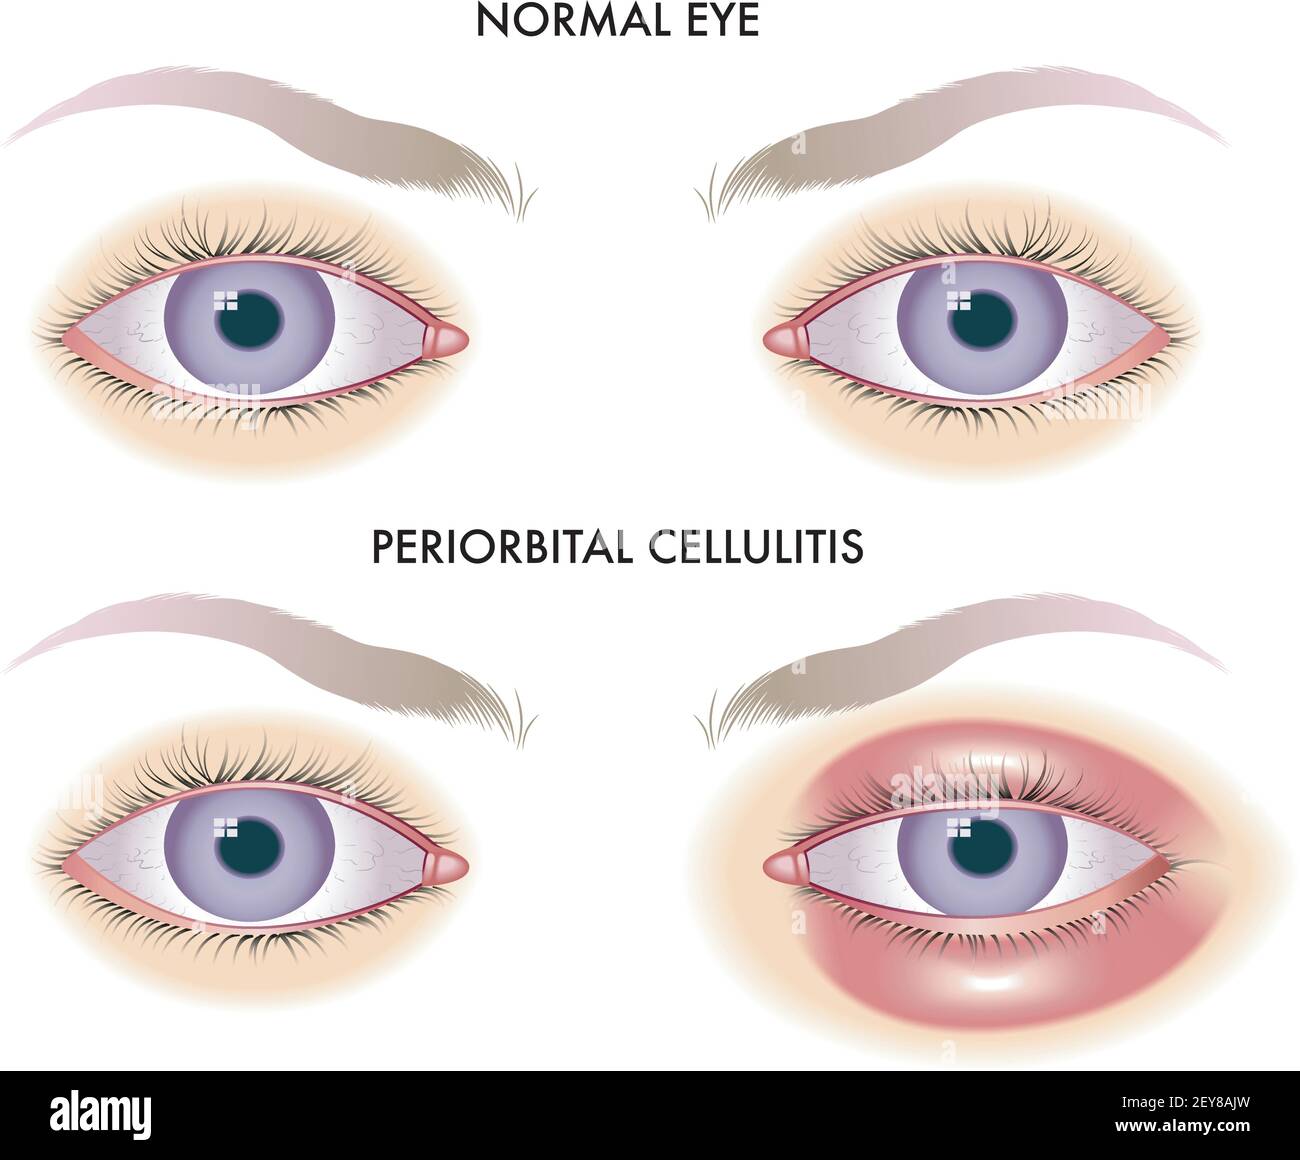 Medical illustration shows the comparison between normal eyes and those affected by periorbital cellulitis. Stock Vector